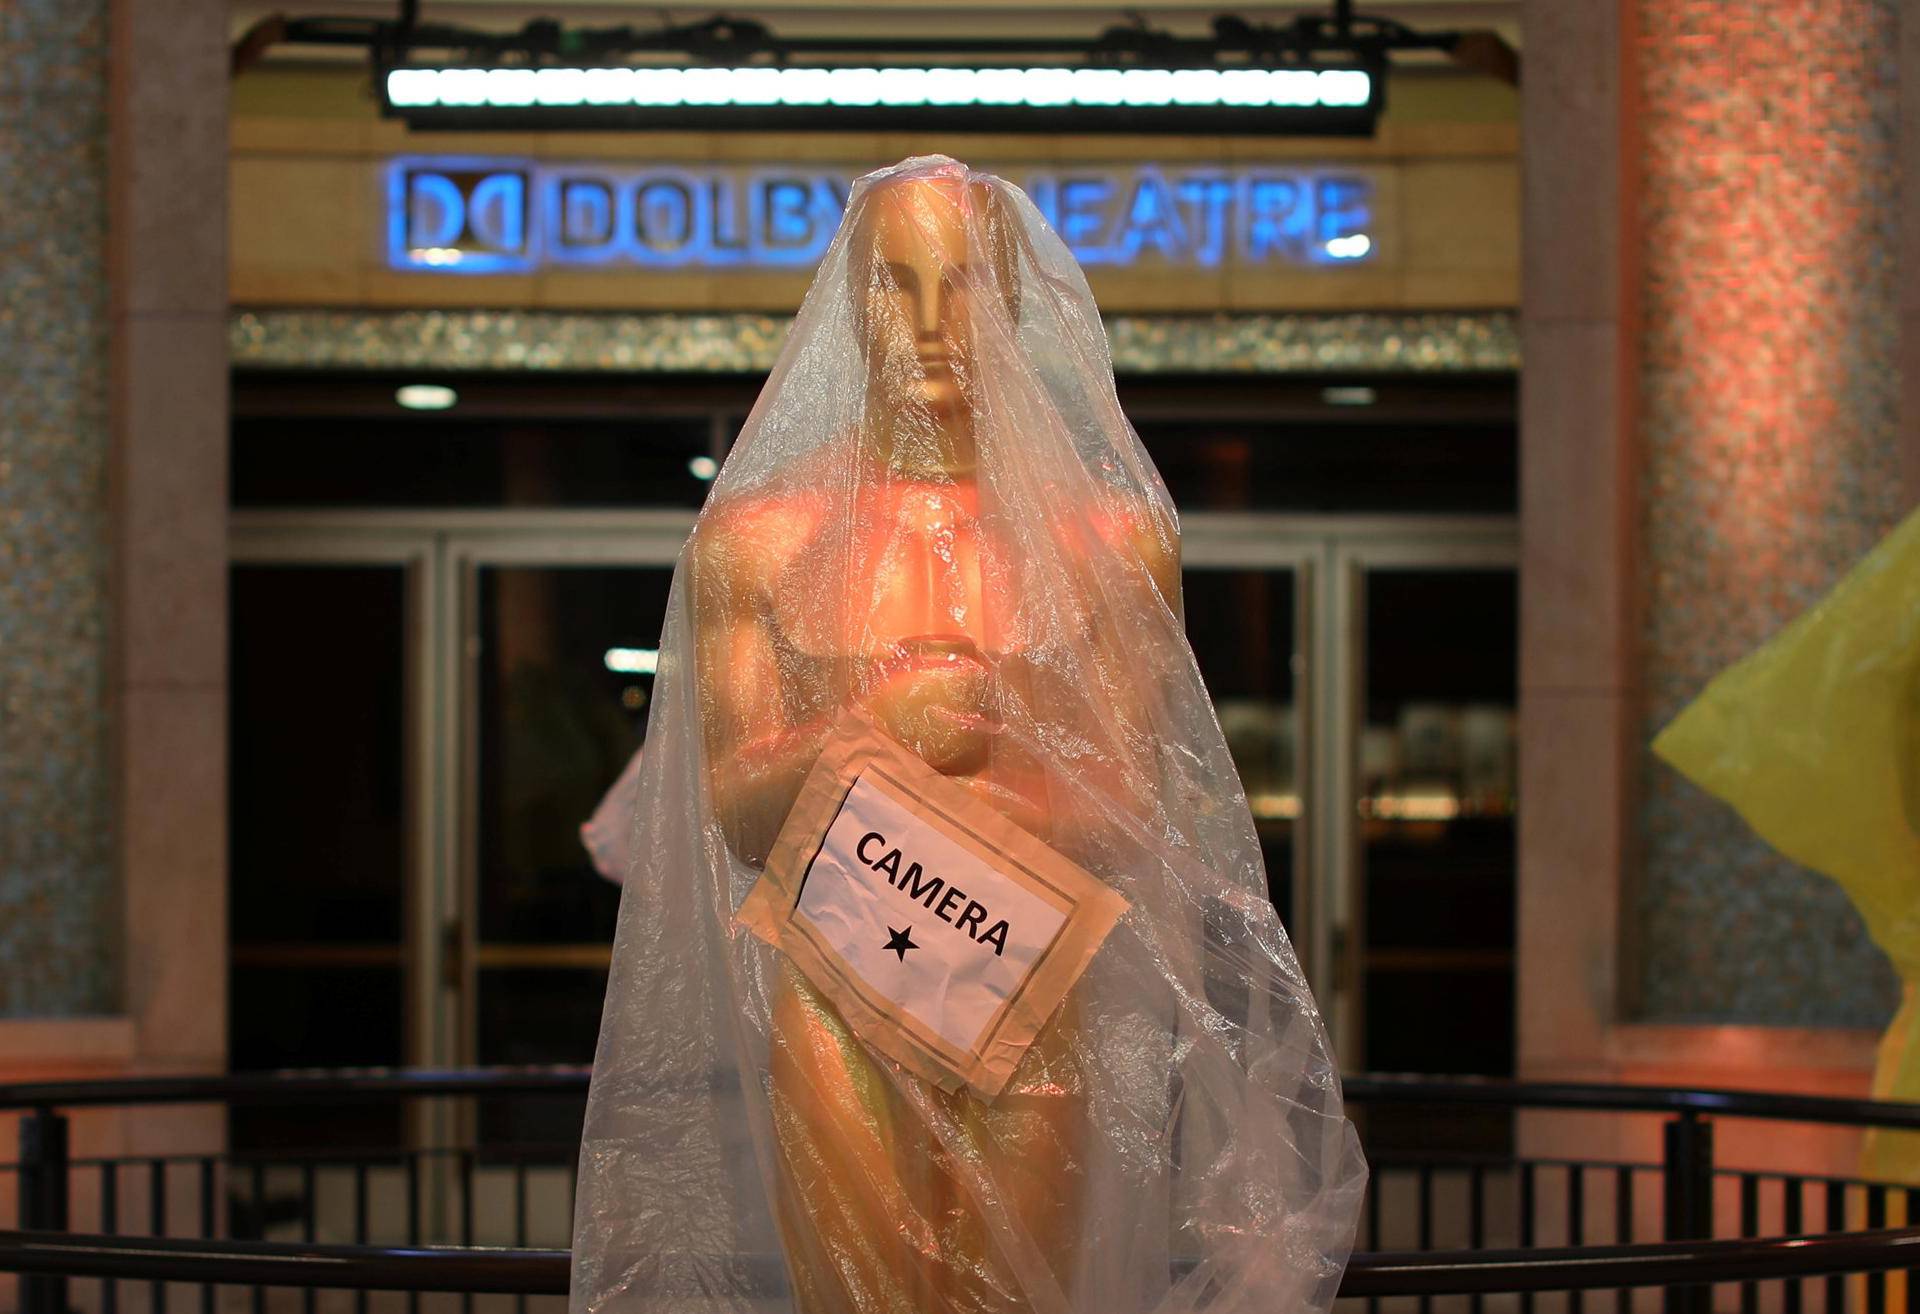 Oscar statues sit covered in plastic at the entrance to the Dolby Theatre as preparations continue for the 89th Academy Awards in Hollywood,